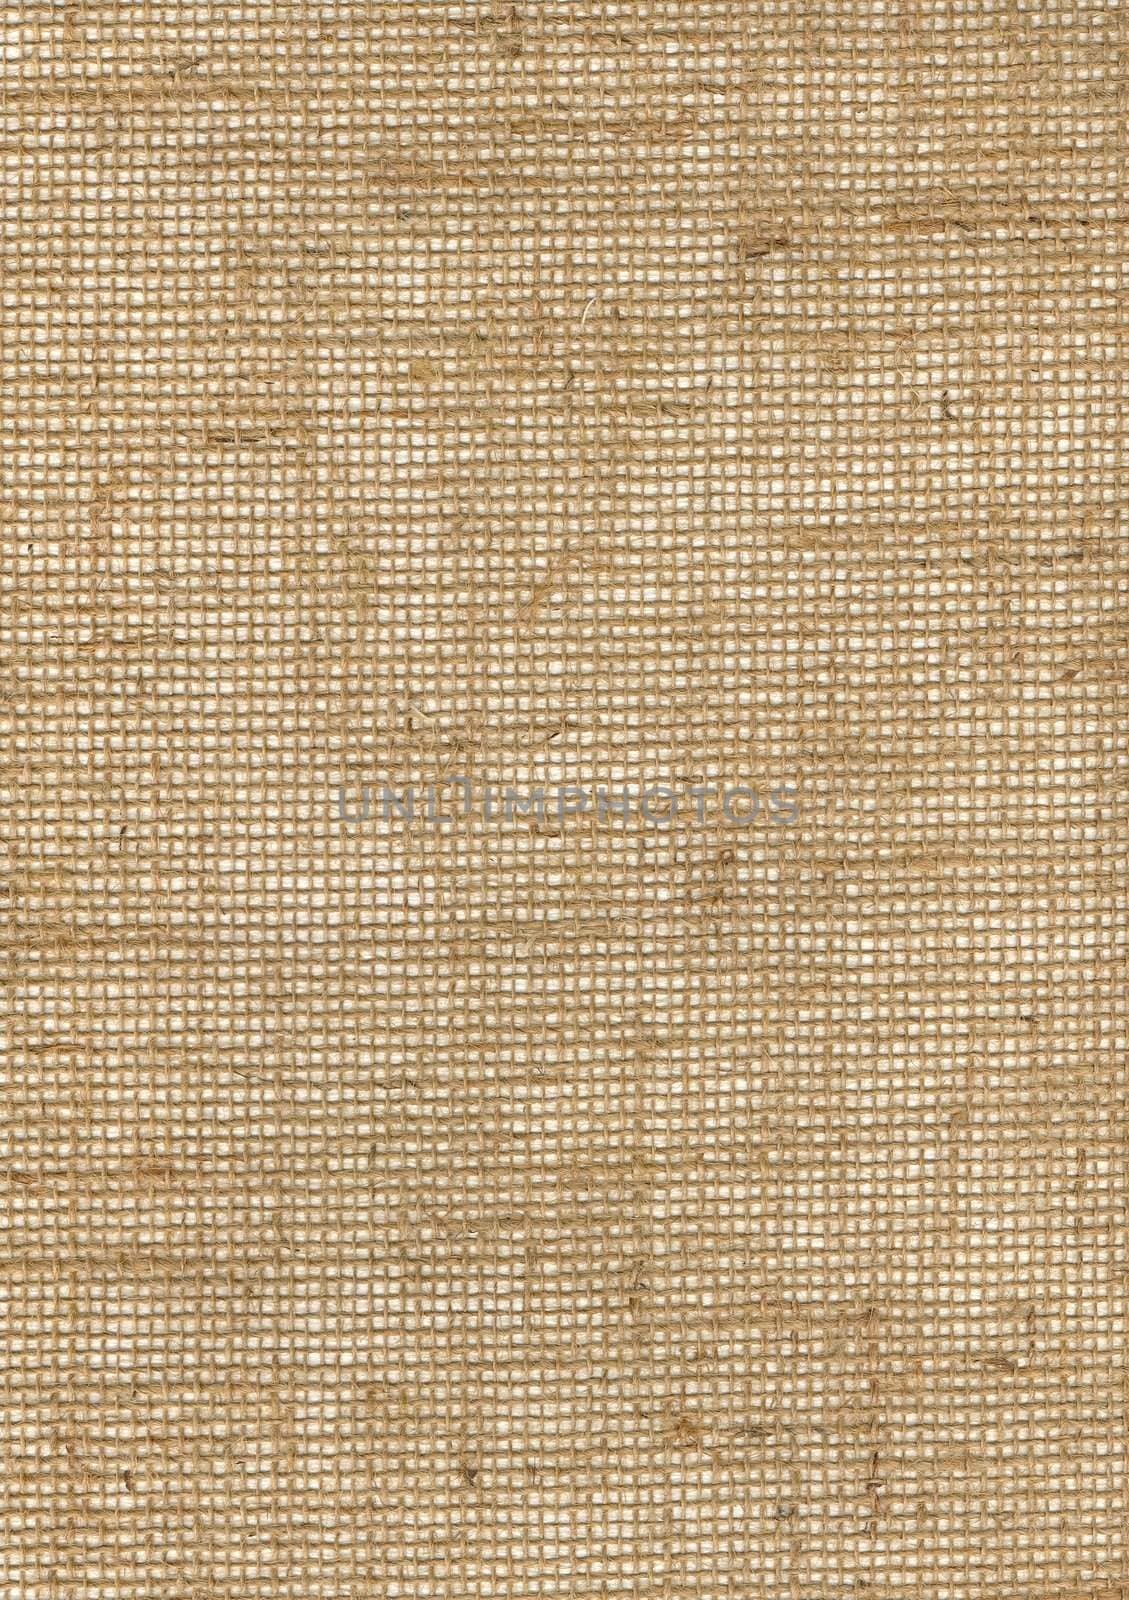 A sample of roughly woven jute fabric in natural color. A background board where you can stick or pin anything you like.